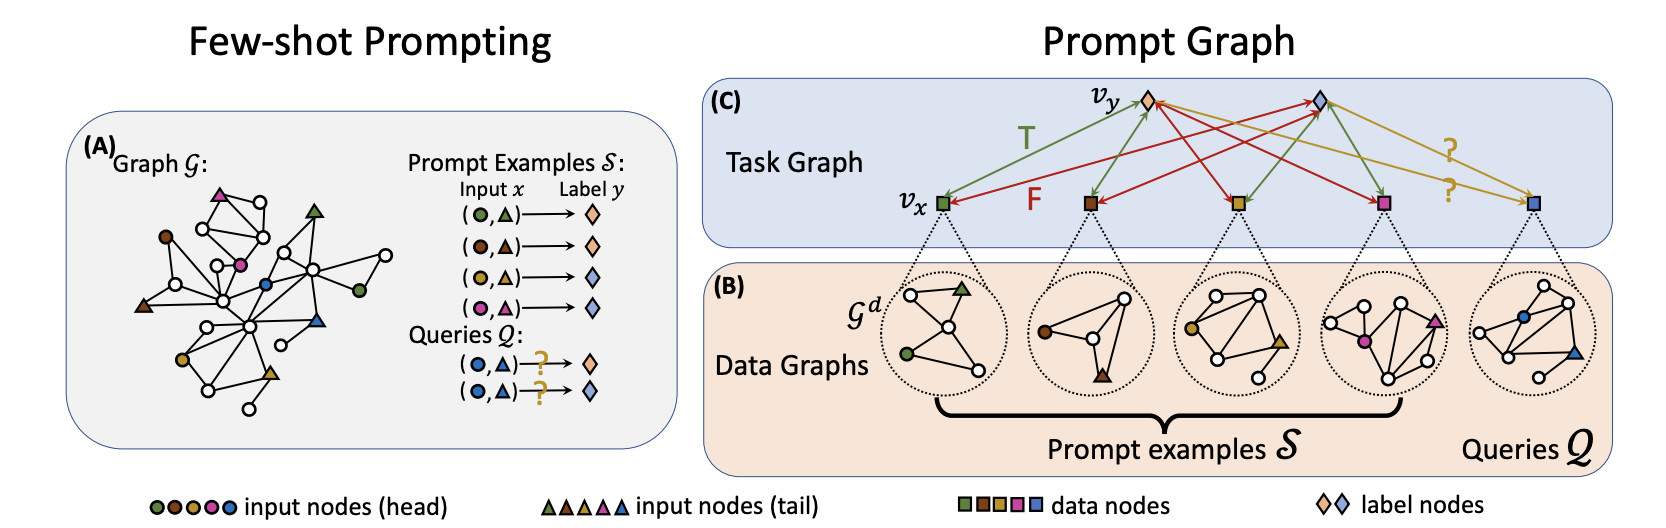 In-context few-shot prompting over graphs with prompt graph for edge classification in PRODIGY. 